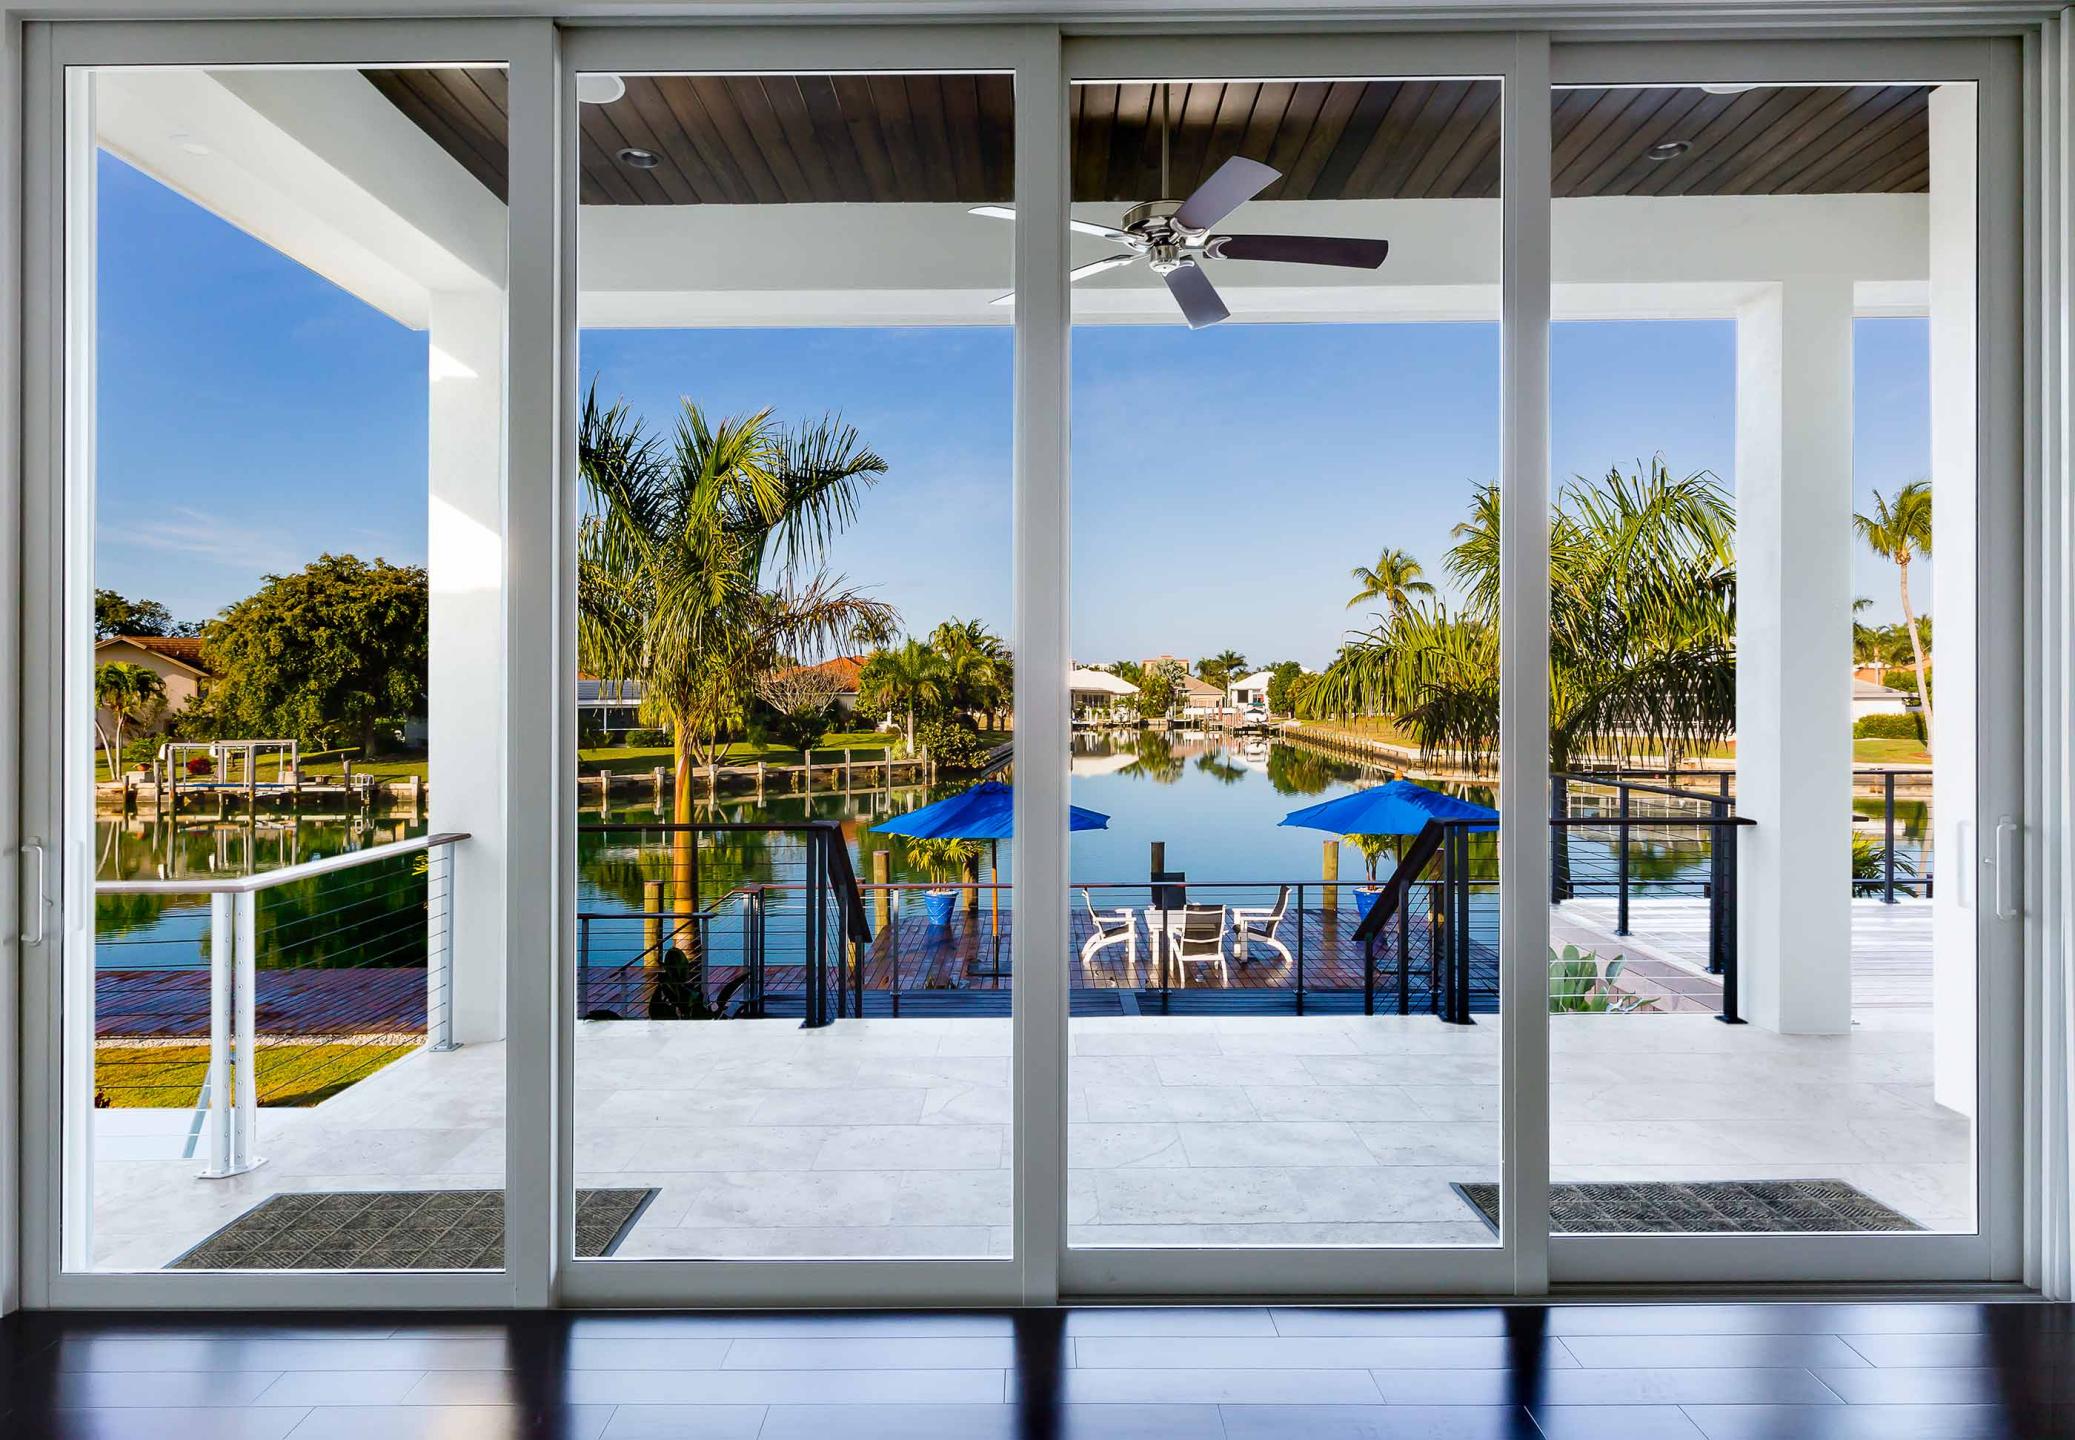 Luxury waterfront homes in Marco Island Florida interiors and exterior photography  : IMAGES-Keywording : New York NY Architectural Photographer | Interior and Exterior